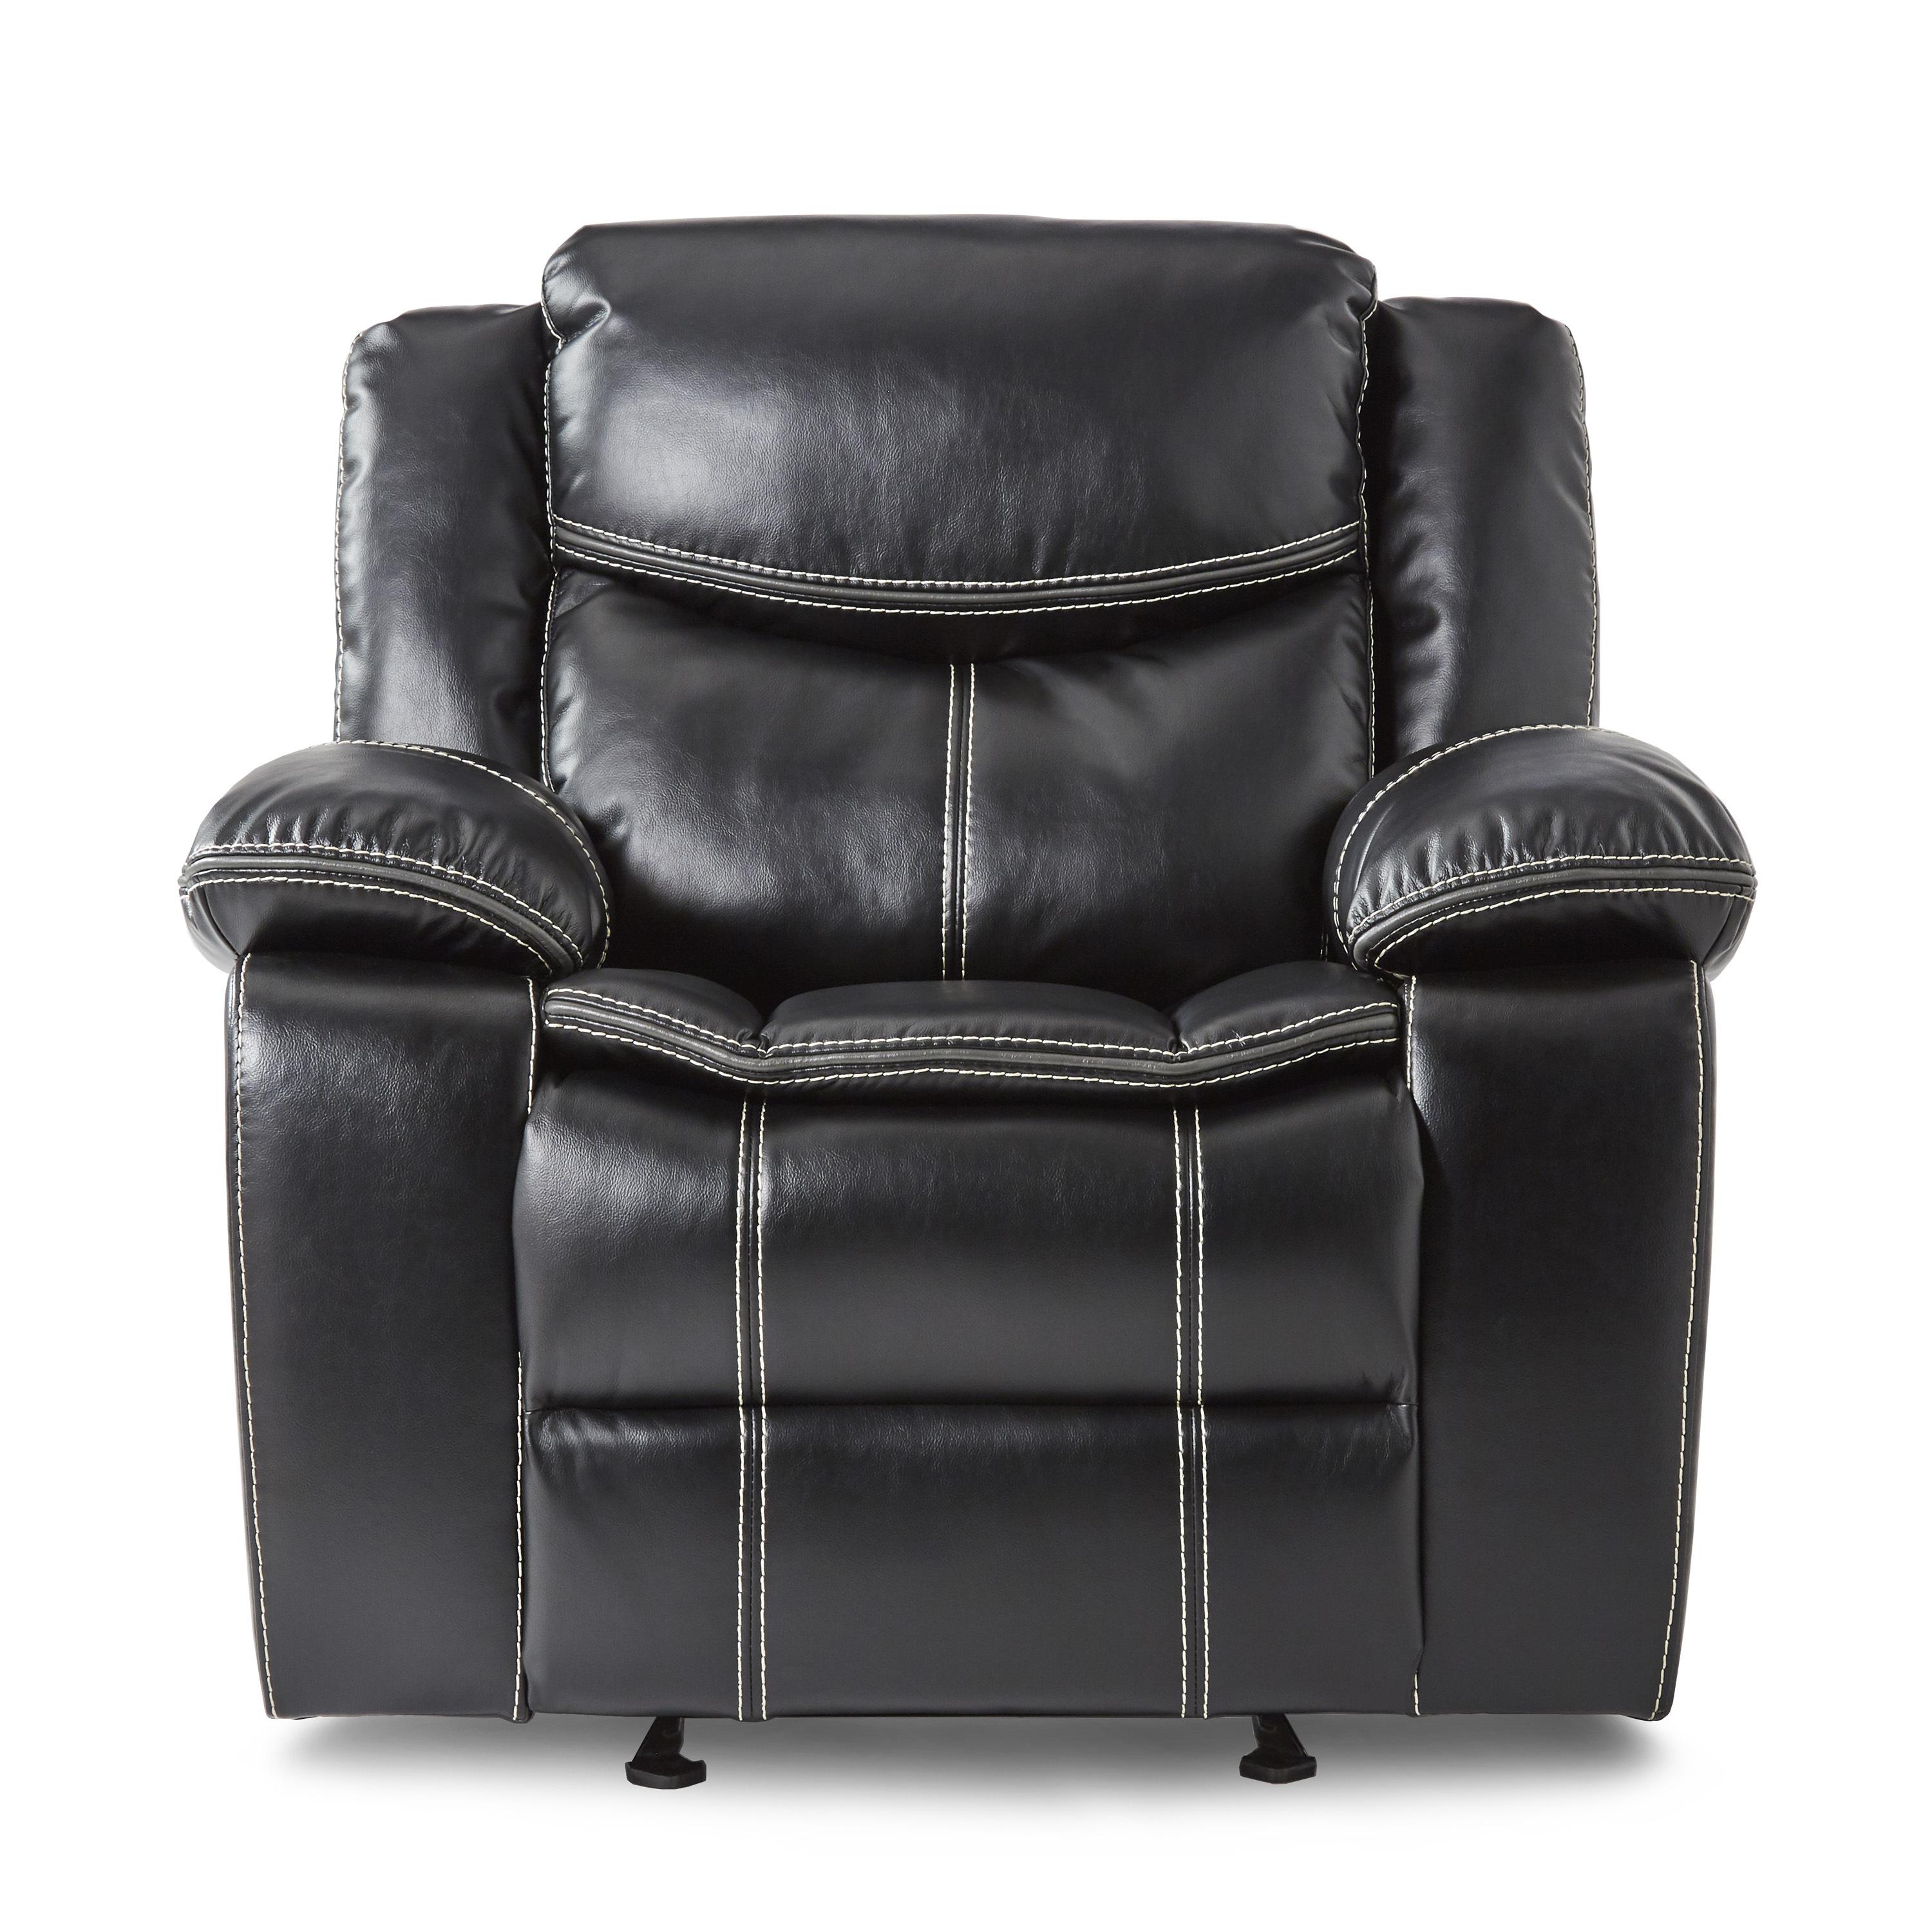 Transitional Reclining Chair 8230BLK-1 Bastrop 8230BLK-1 in Black Faux Leather